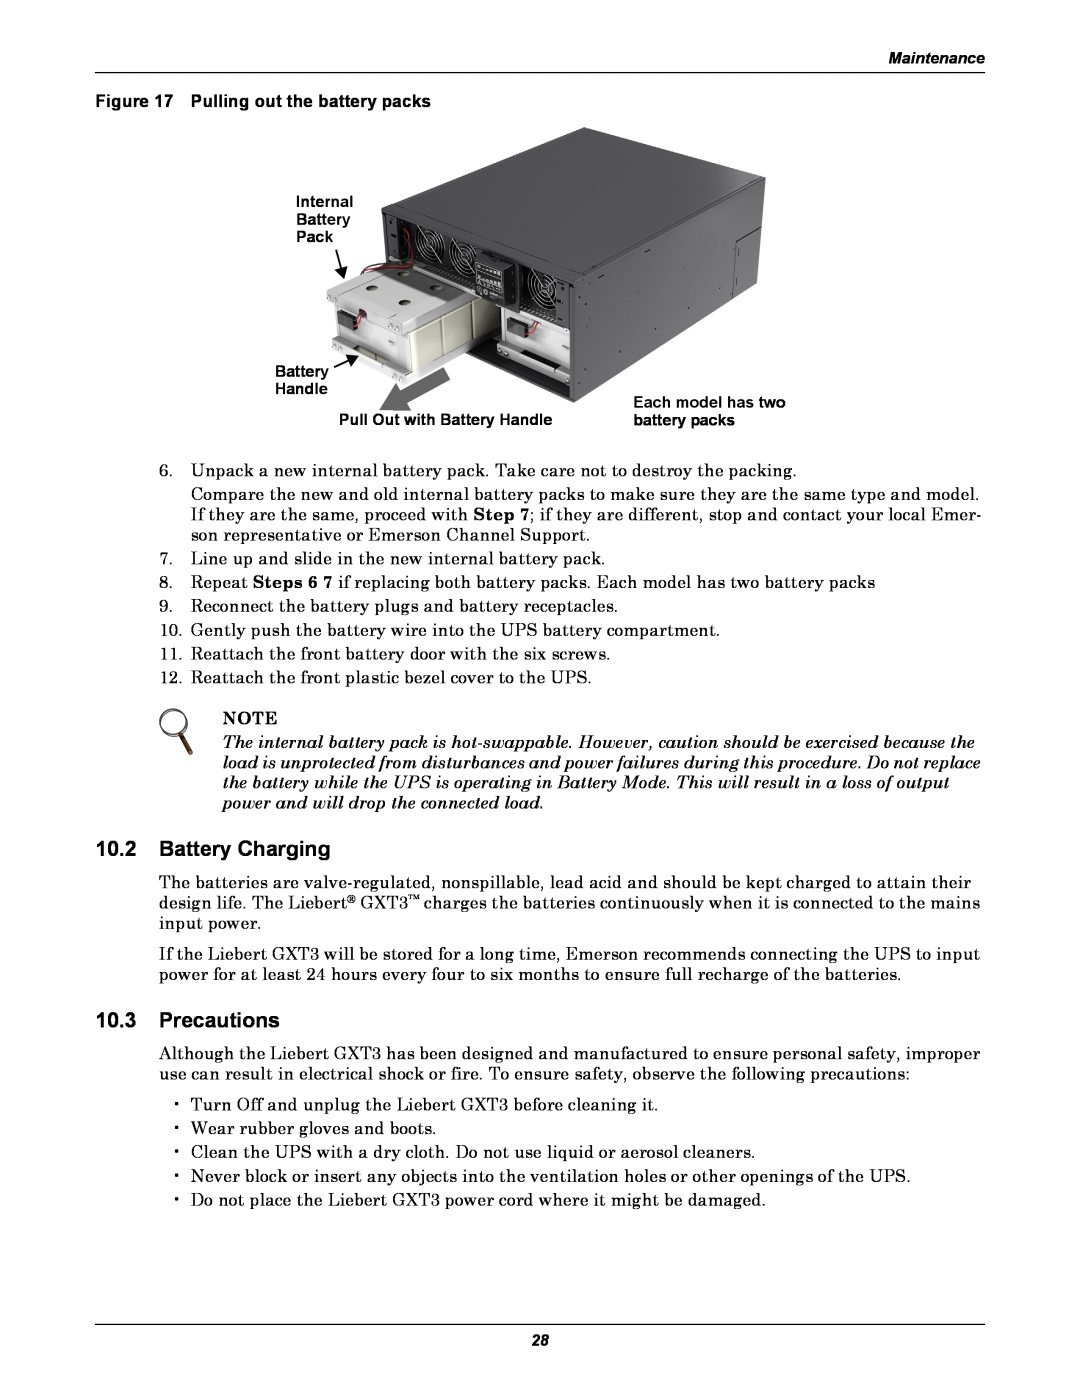 Emerson GXT3 230V user manual 10.2Battery Charging, 10.3Precautions, Pulling out the battery packs 